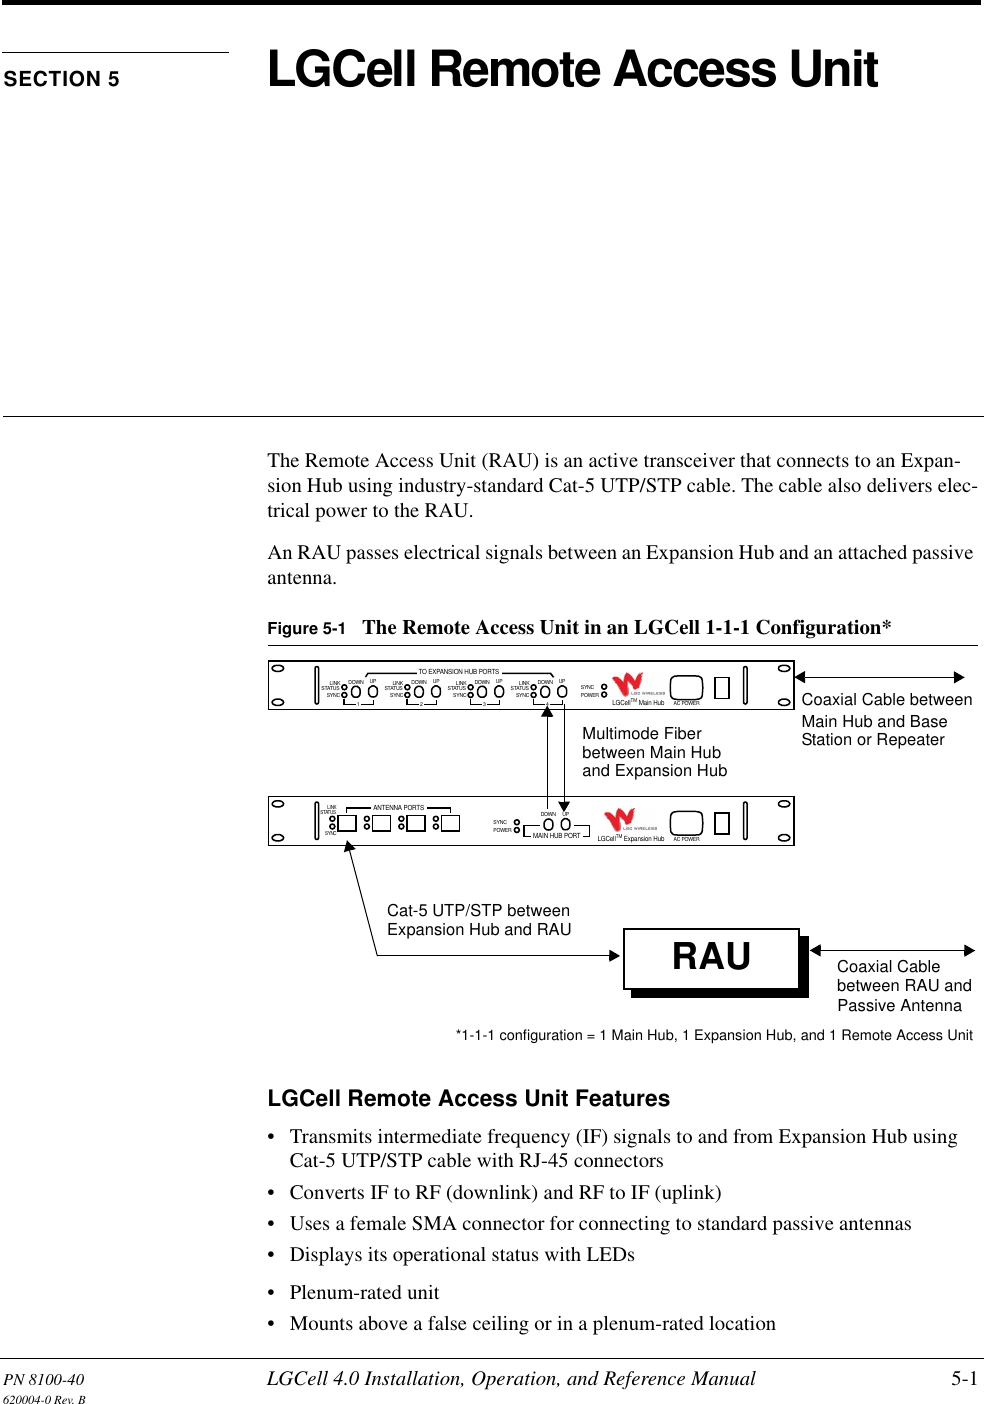 PN 8100-40 LGCell 4.0 Installation, Operation, and Reference Manual 5-1620004-0 Rev. BSECTION 5 LGCell Remote Access UnitThe Remote Access Unit (RAU) is an active transceiver that connects to an Expan-sion Hub using industry-standard Cat-5 UTP/STP cable. The cable also delivers elec-trical power to the RAU.An RAU passes electrical signals between an Expansion Hub and an attached passive antenna.Figure 5-1 The Remote Access Unit in an LGCell 1-1-1 Configuration* LGCell Remote Access Unit Features• Transmits intermediate frequency (IF) signals to and from Expansion Hub using Cat-5 UTP/STP cable with RJ-45 connectors• Converts IF to RF (downlink) and RF to IF (uplink)• Uses a female SMA connector for connecting to standard passive antennas• Displays its operational status with LEDs• Plenum-rated unit• Mounts above a false ceiling or in a plenum-rated locationRAUMultimode Fiberbetween Main Huband Expansion HubCat-5 UTP/STP betweenExpansion Hub and RAU Main Hub and Base Station or RepeaterCoaxial CableCoaxial Cable betweenAC POWERLGCellTM Main HubSYNCPOWERLINKSYNCSTATUS DOWN UP1LINKSYNCSTATUS DOWN UP2LINKSYNCSTATUS DOWN UP3LINKSYNCSTATUS DOWN UP4TO EXPANSION HUB PORTSAC POWERLGCellTM Expansion HubSYNCPOWERSYNCLINKSTATUSANTENNA PORTSDOWN UPMAIN HUB PORTbetween RAU andPassive Antenna*1-1-1 configuration = 1 Main Hub, 1 Expansion Hub, and 1 Remote Access Unit